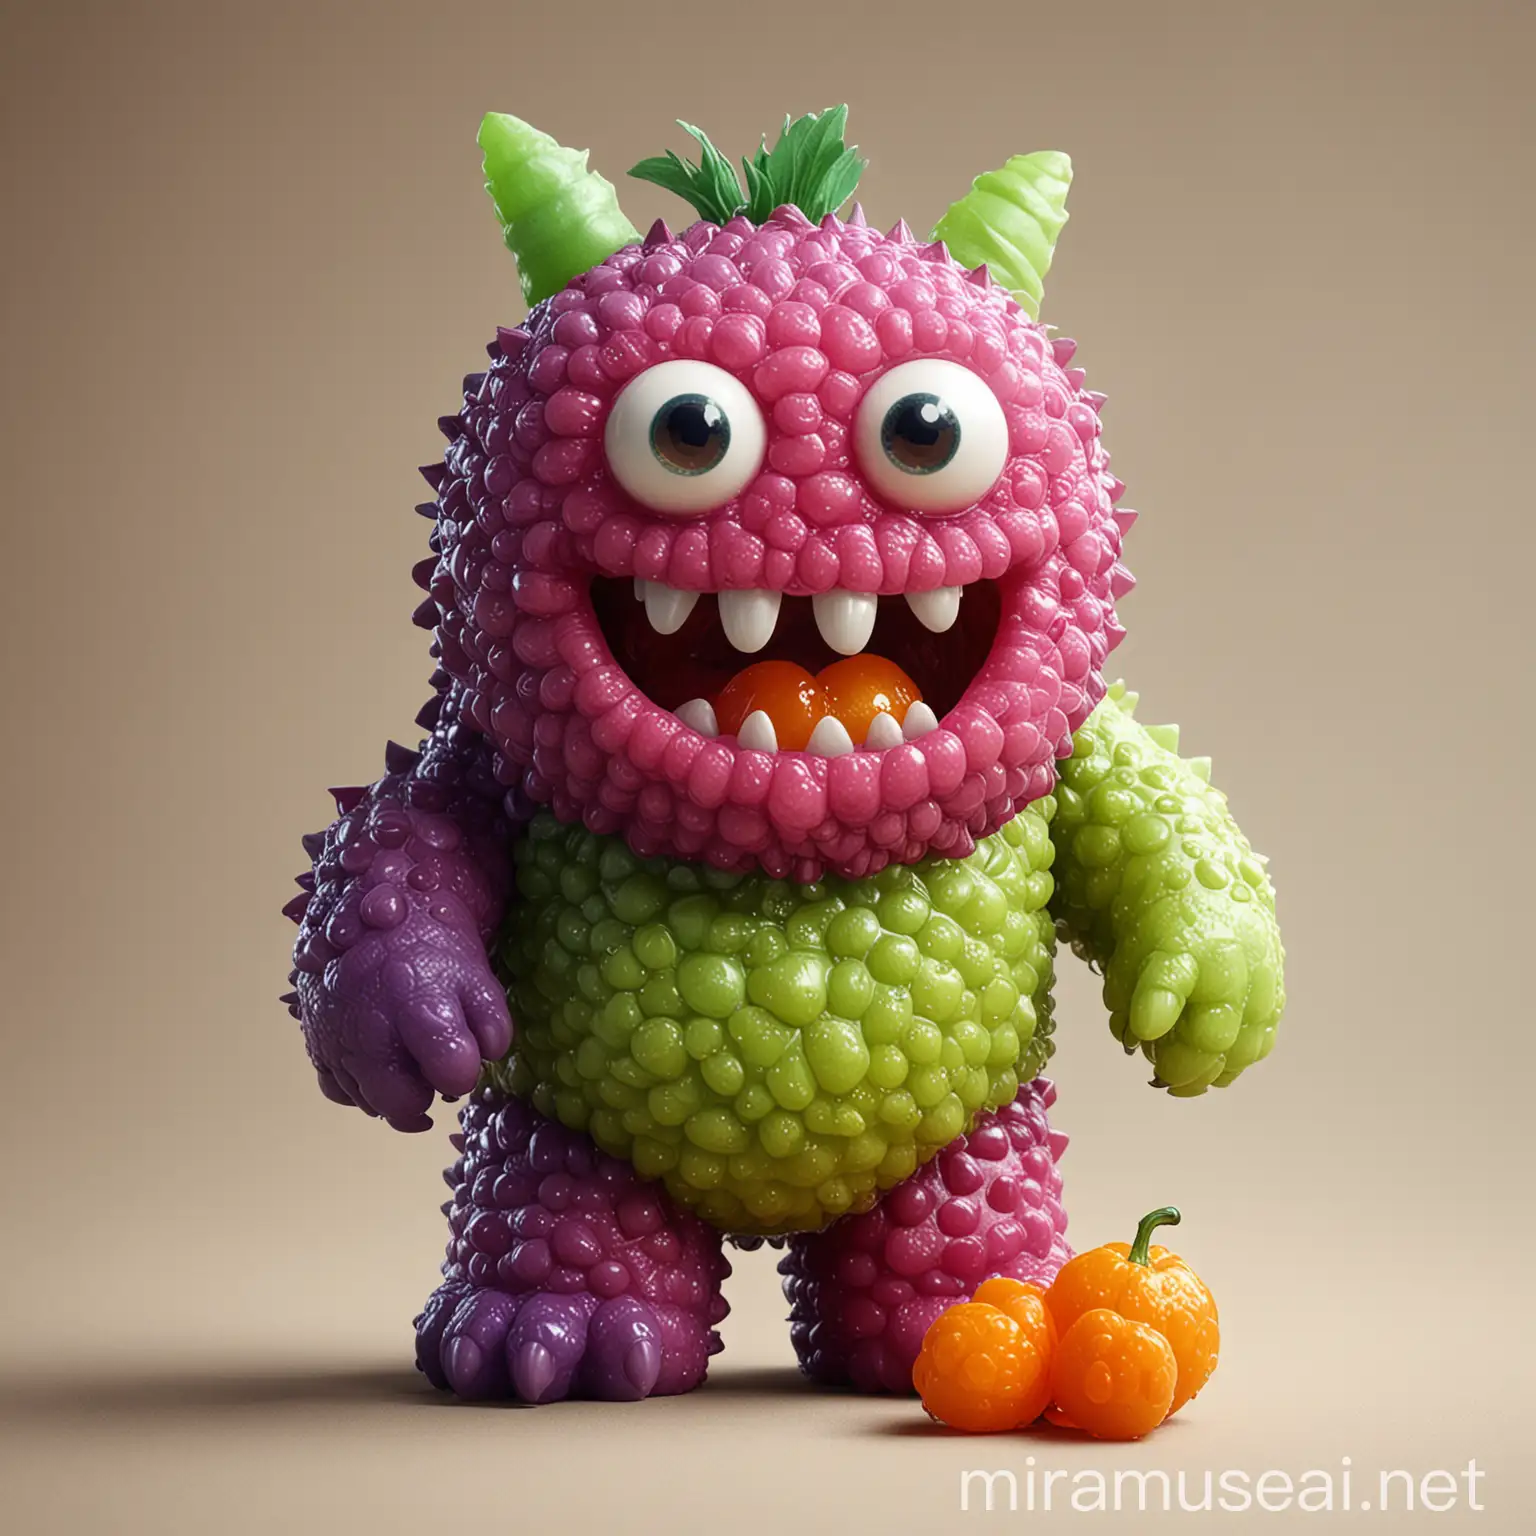 Colorful Friendly Monster Sculpture Made of Gummy Textured Fruits